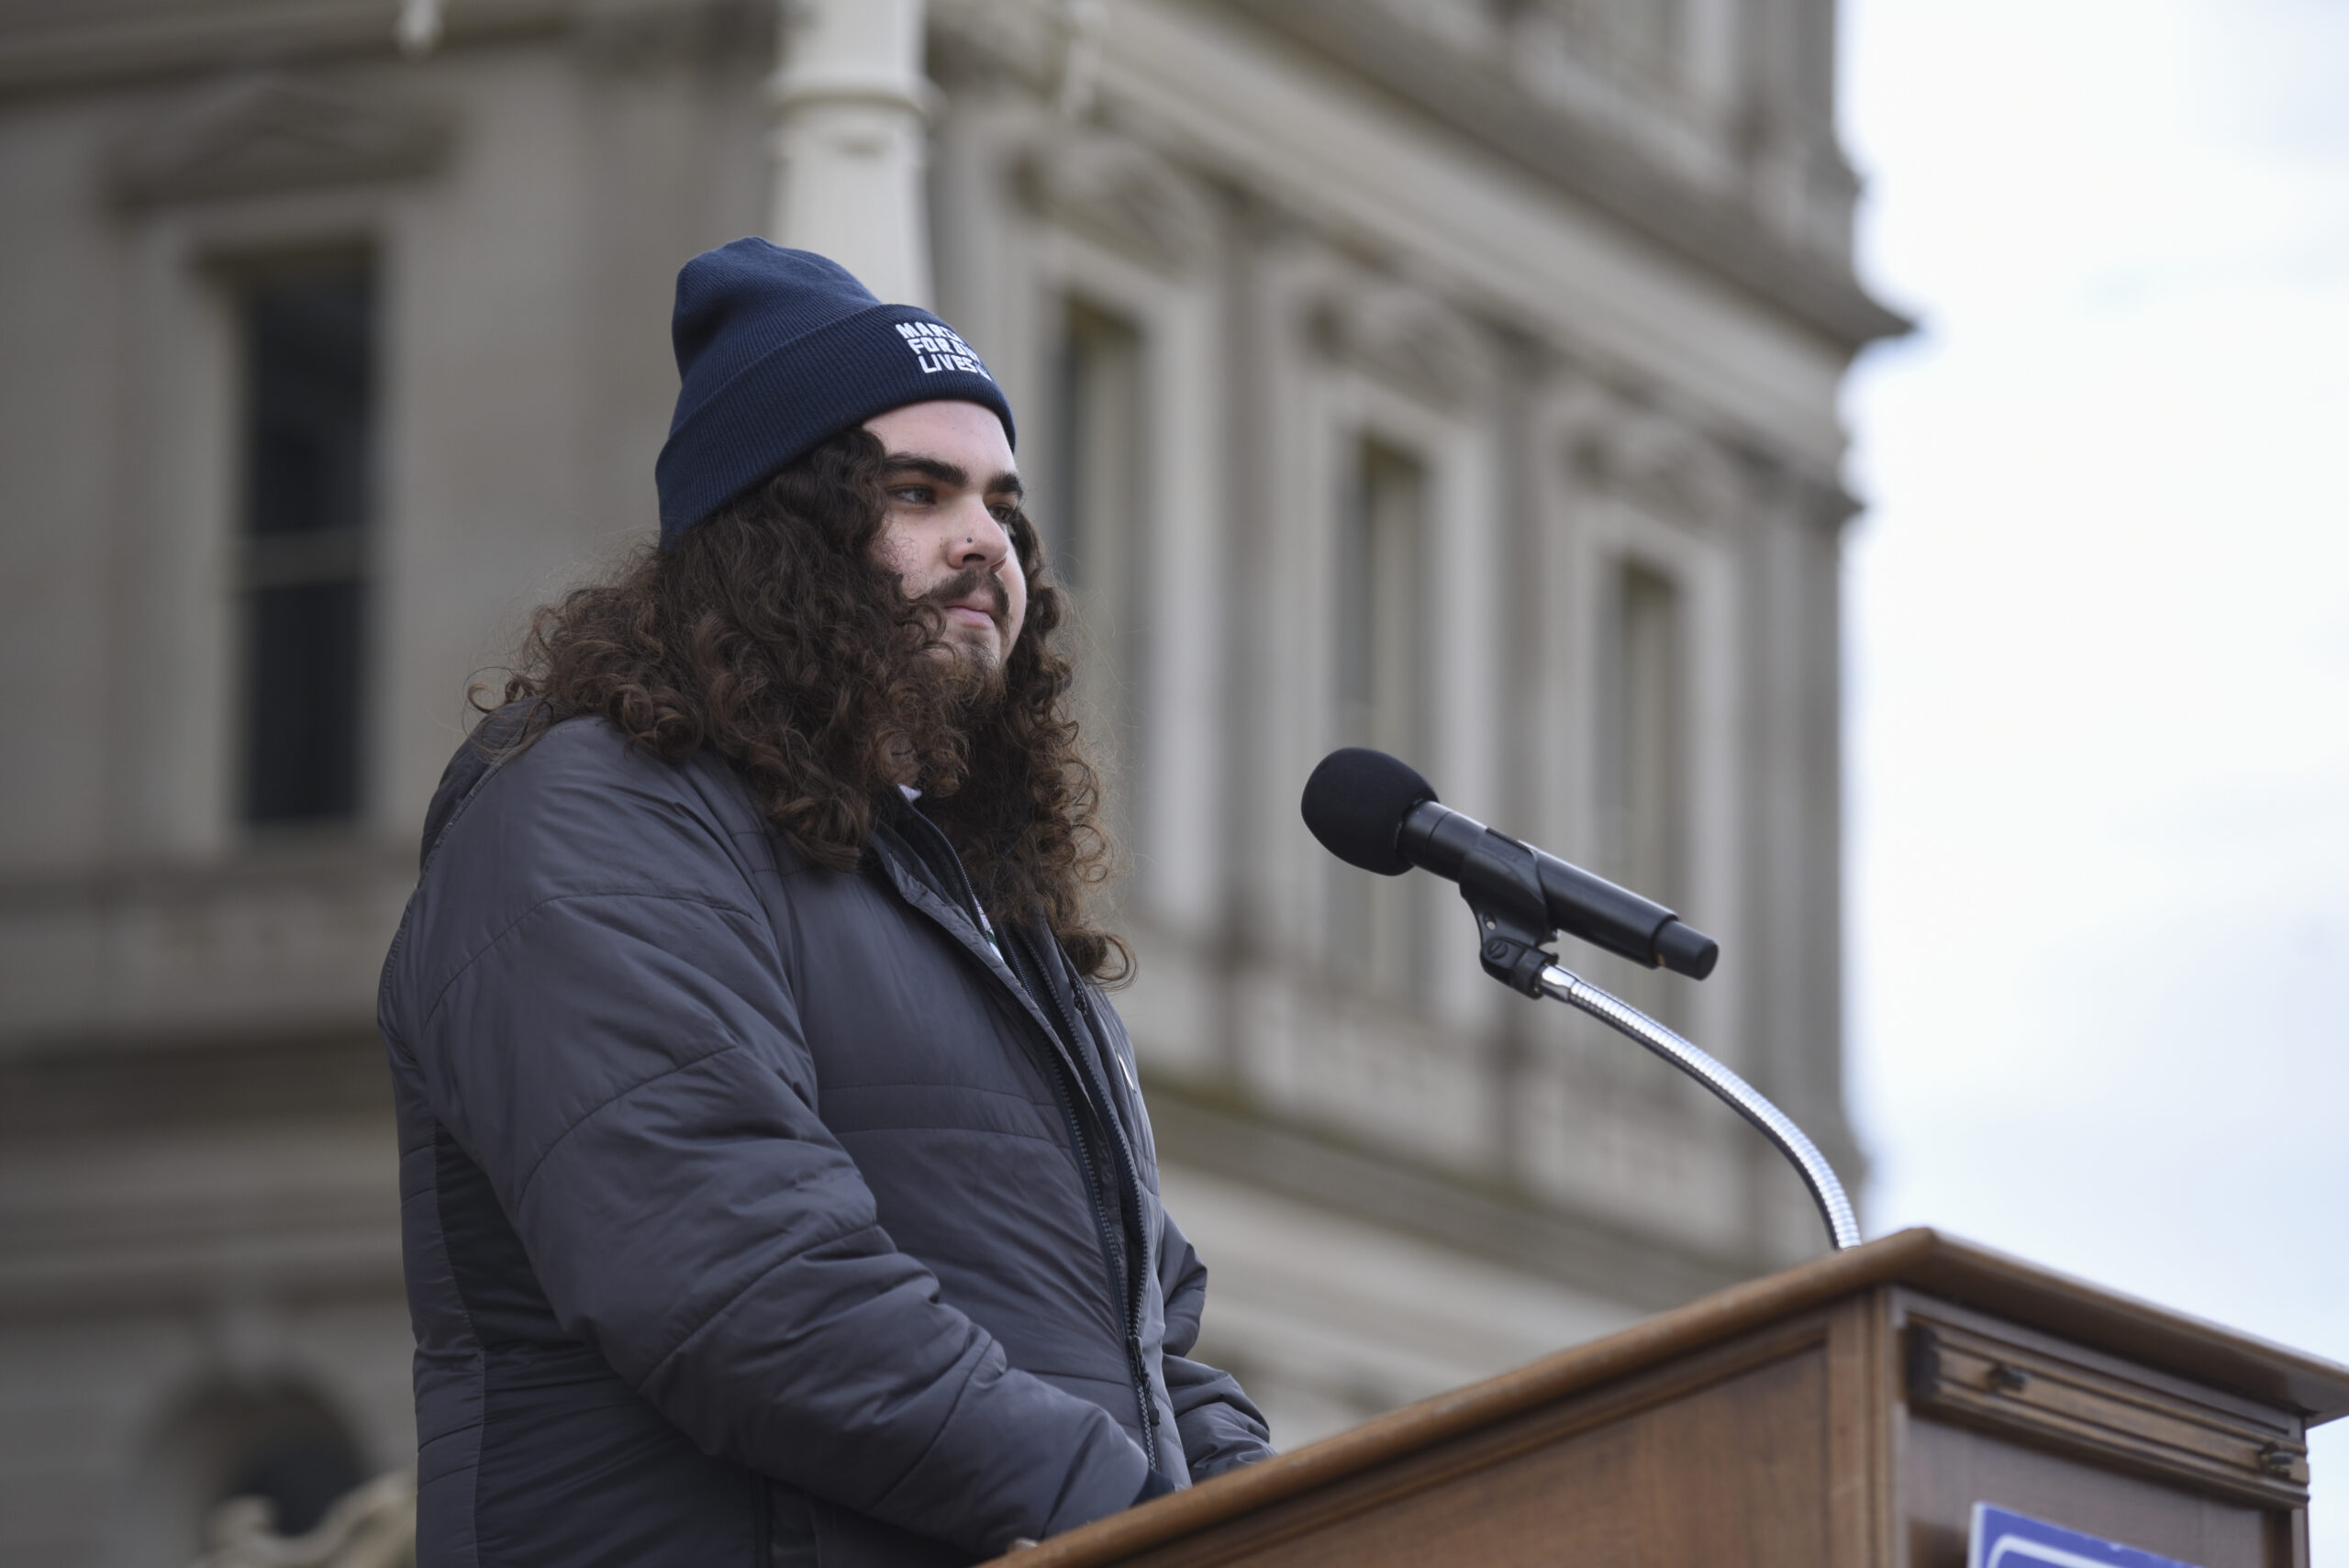 Troy Forbush tells their story of surviving the MSU shooting outside the Michigan Capital.